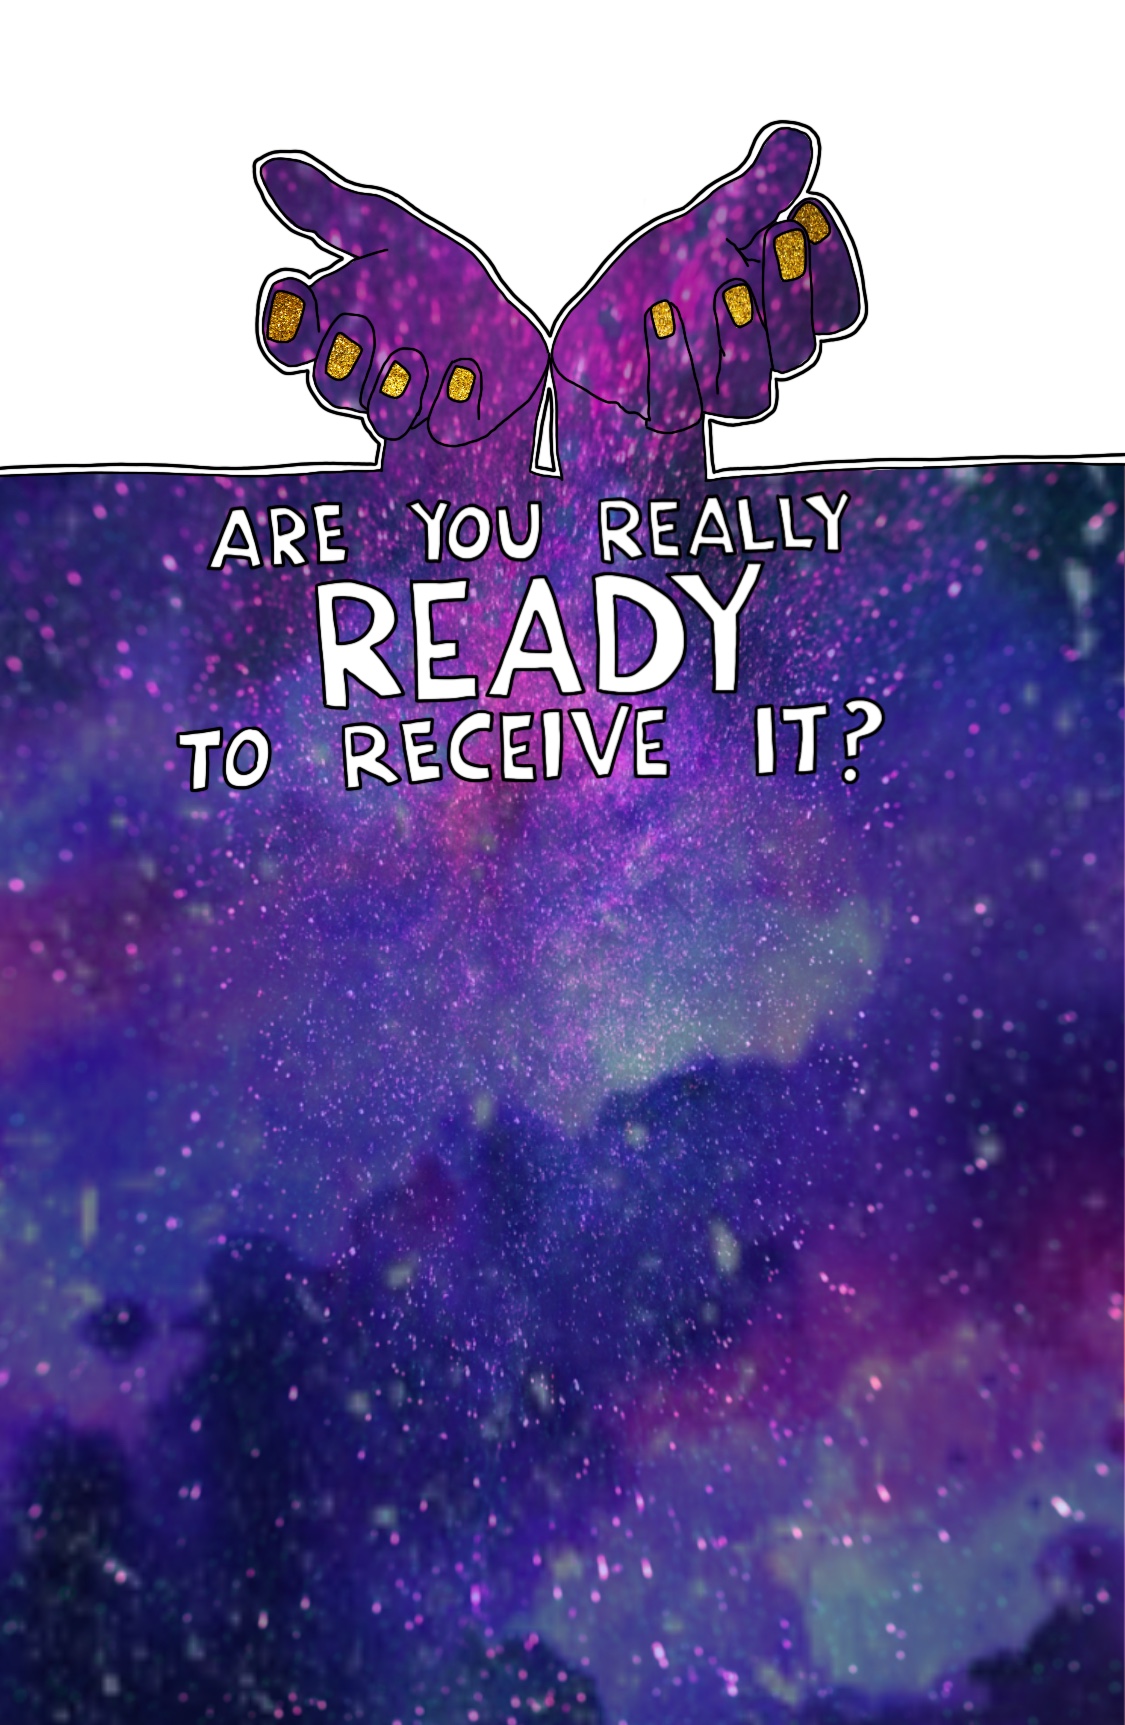 Journal prompt: Are you really ready to receive it?